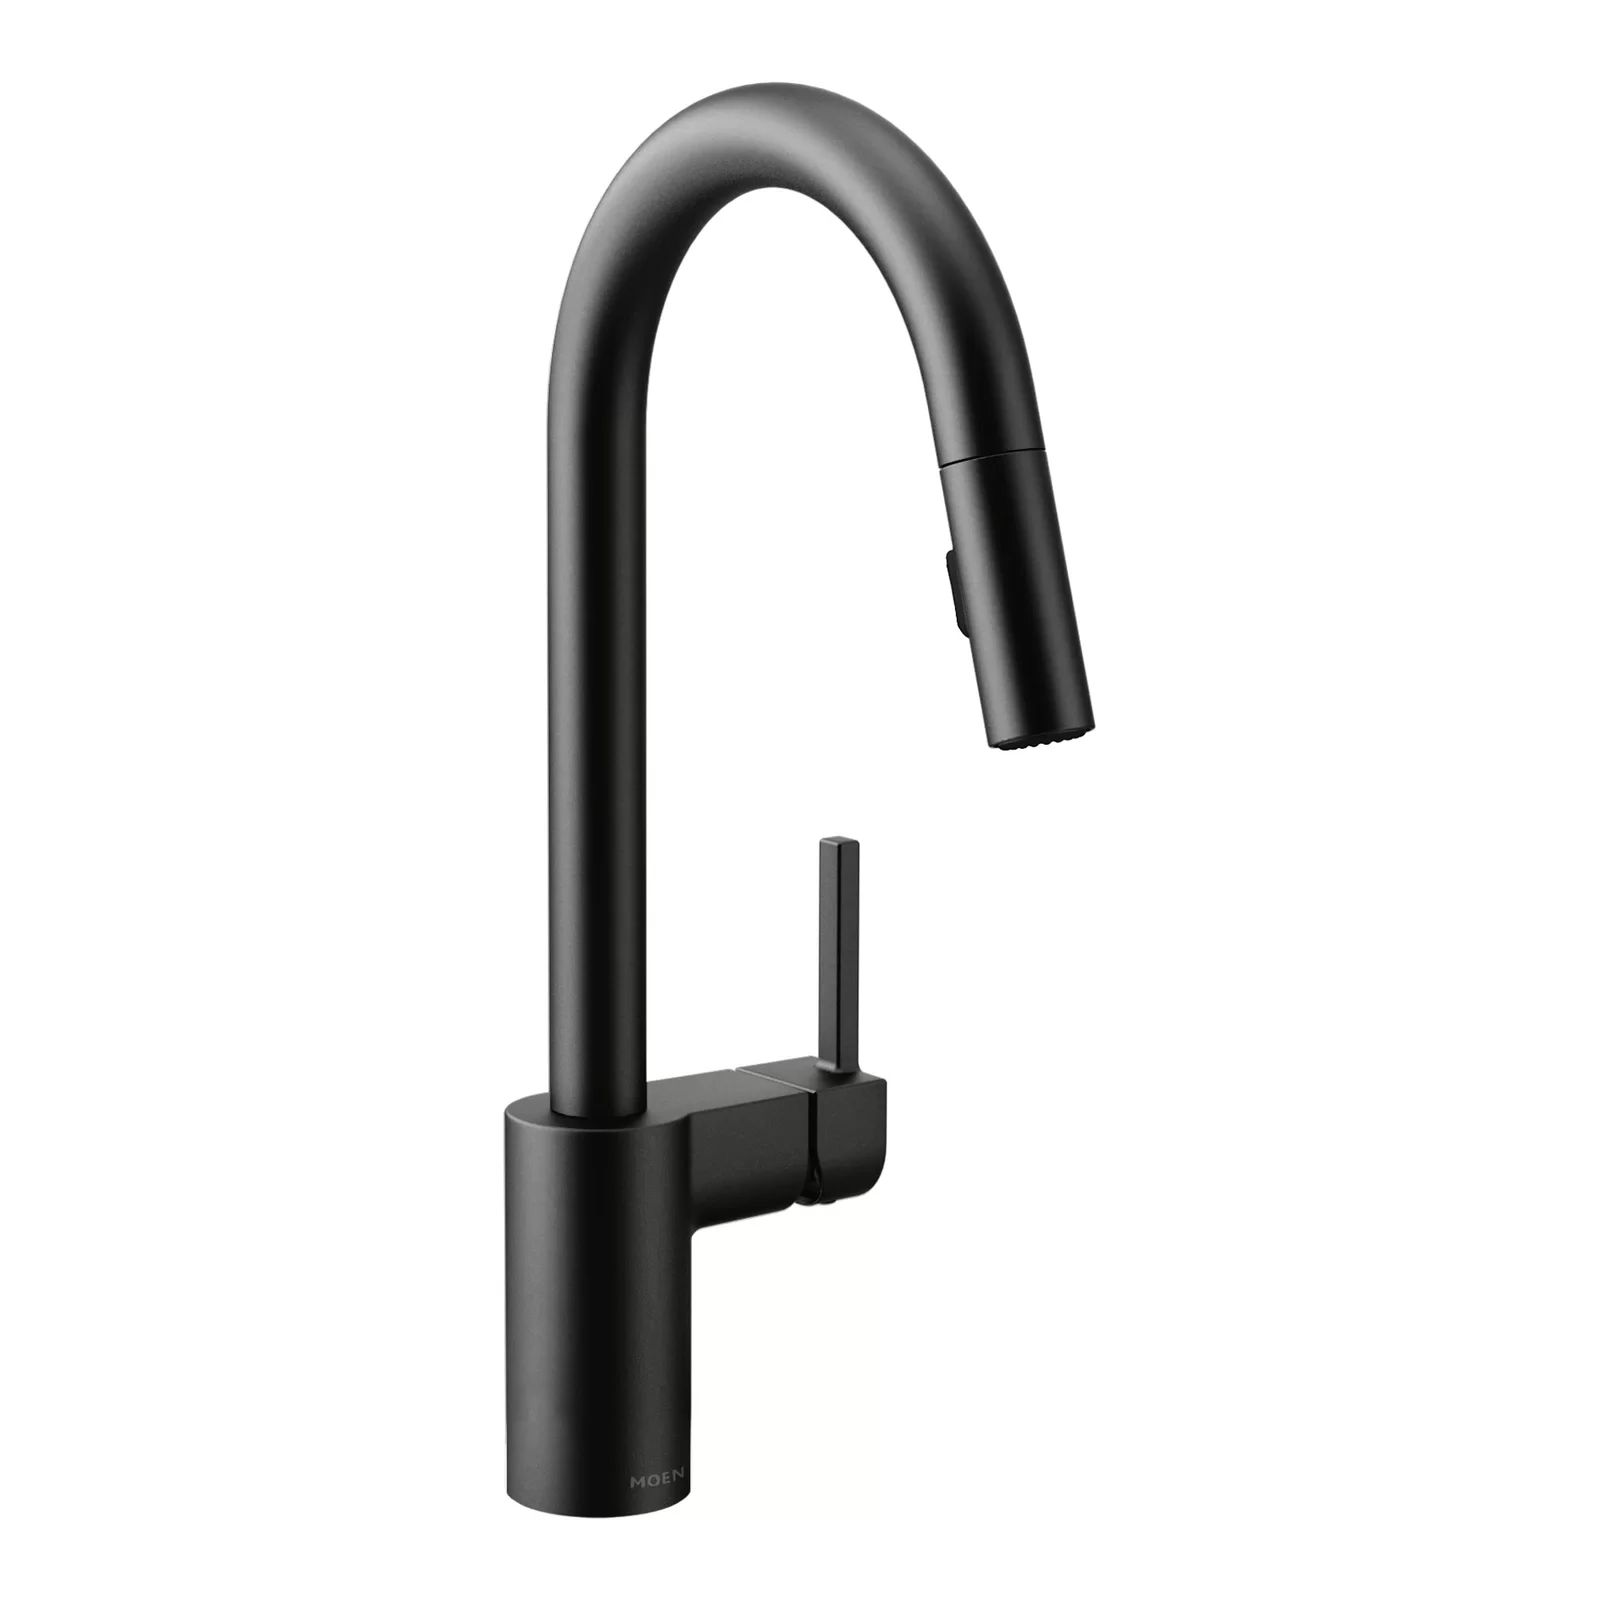 Align Pull Down Single Handle Kitchen Faucet | Wayfair North America